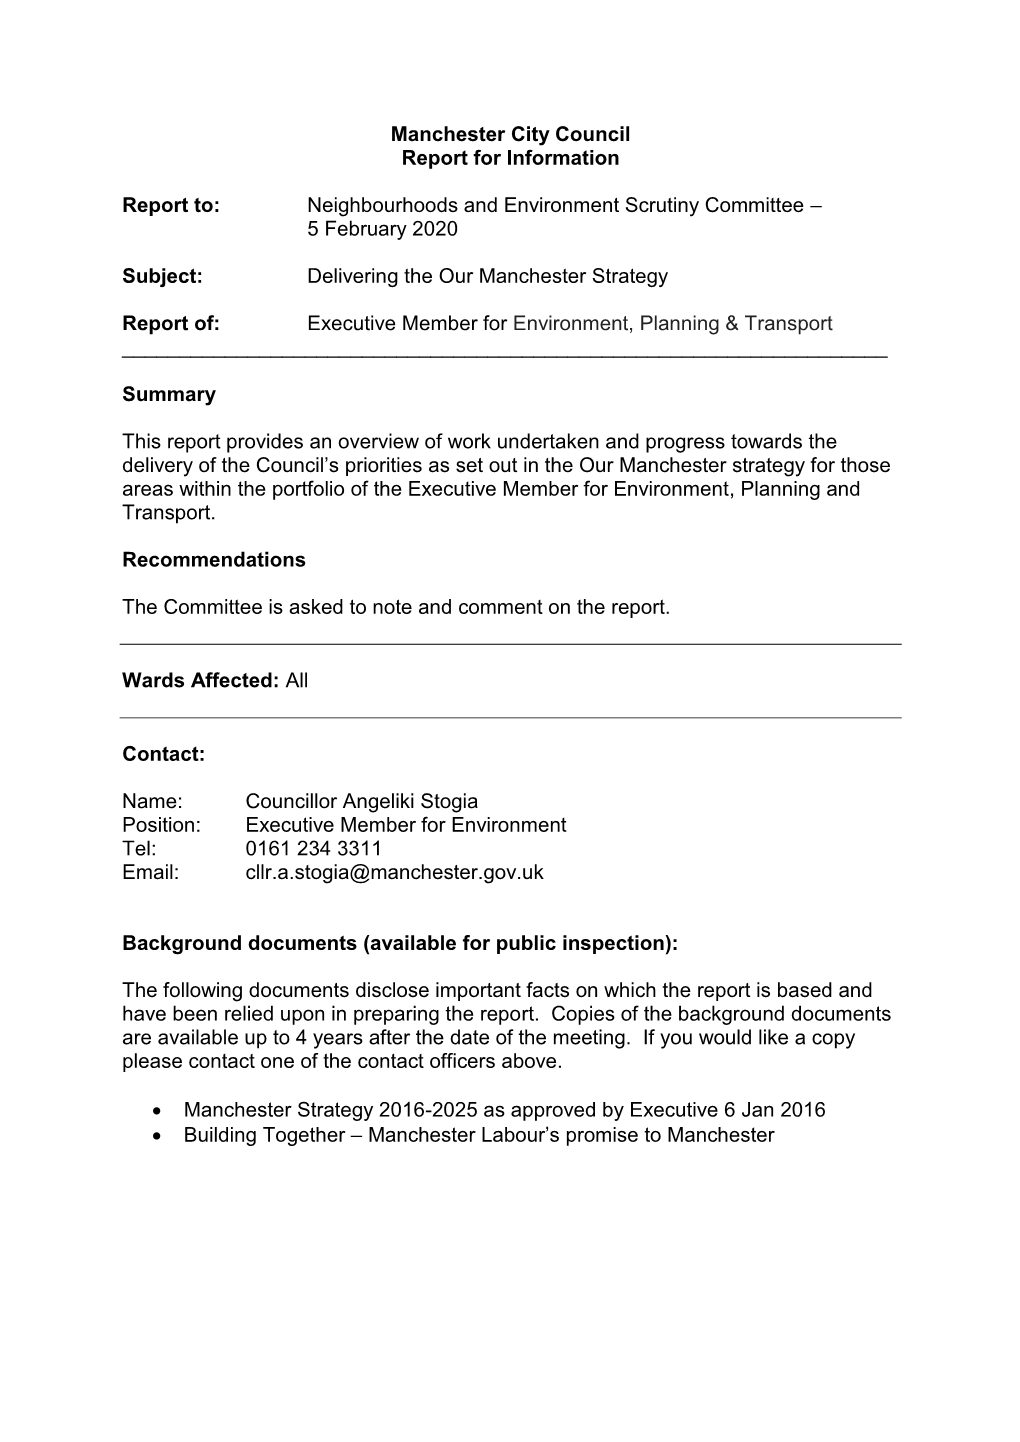 Manchester City Council Report for Information